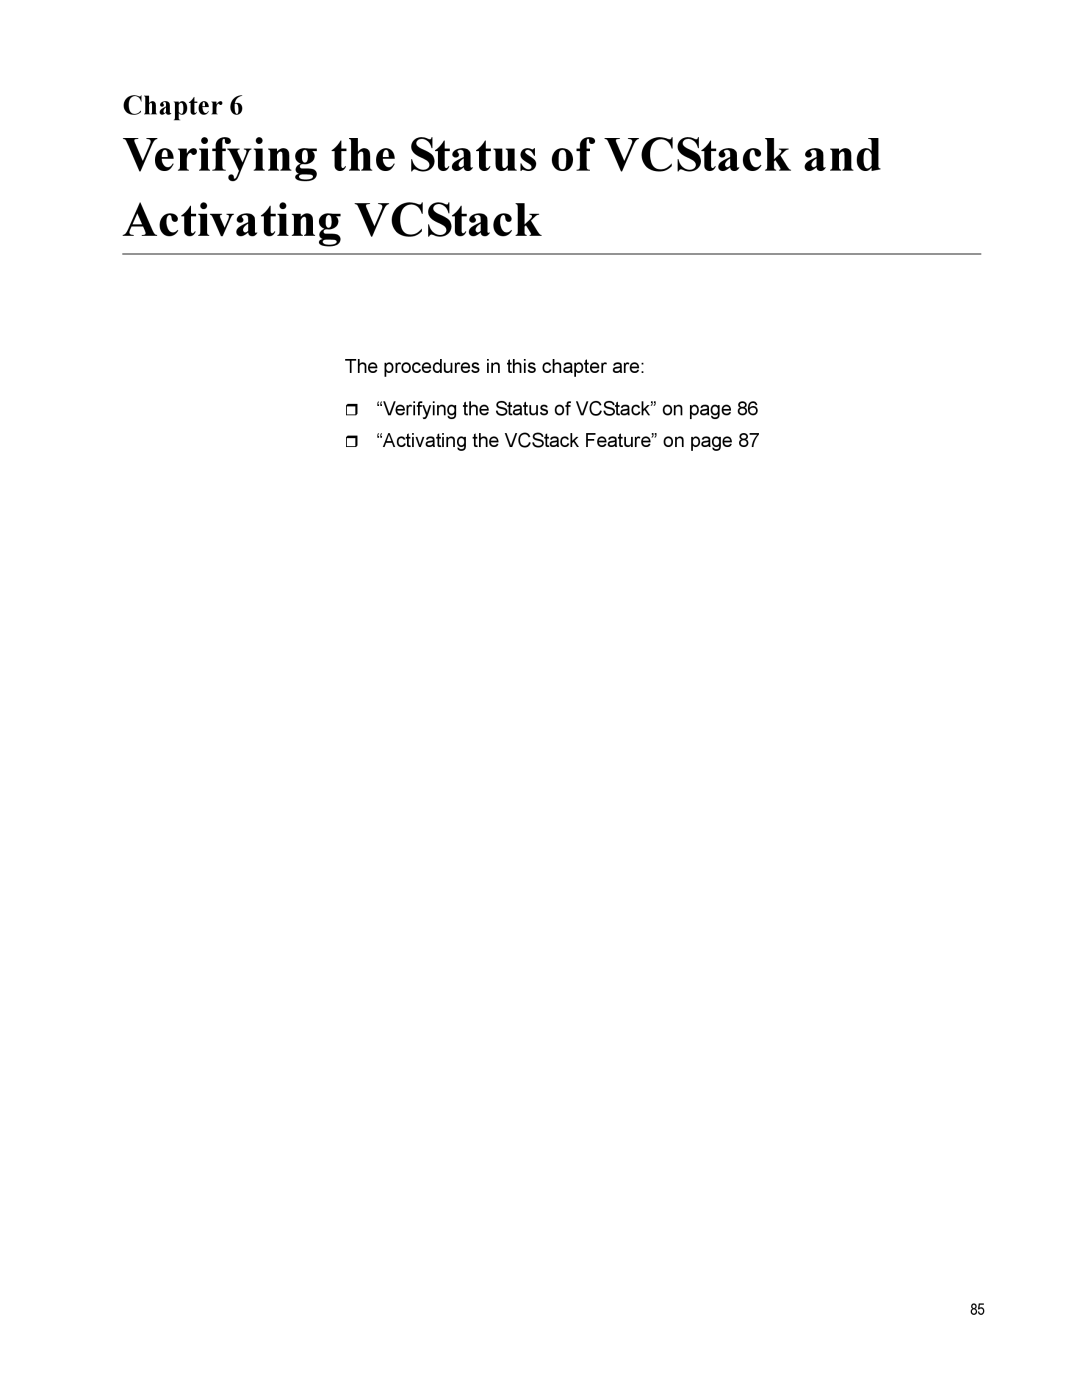 Allied Telesis AT-IX5-28GPX manual Verifying the Status of VCStack and Activating VCStack, Chapter 